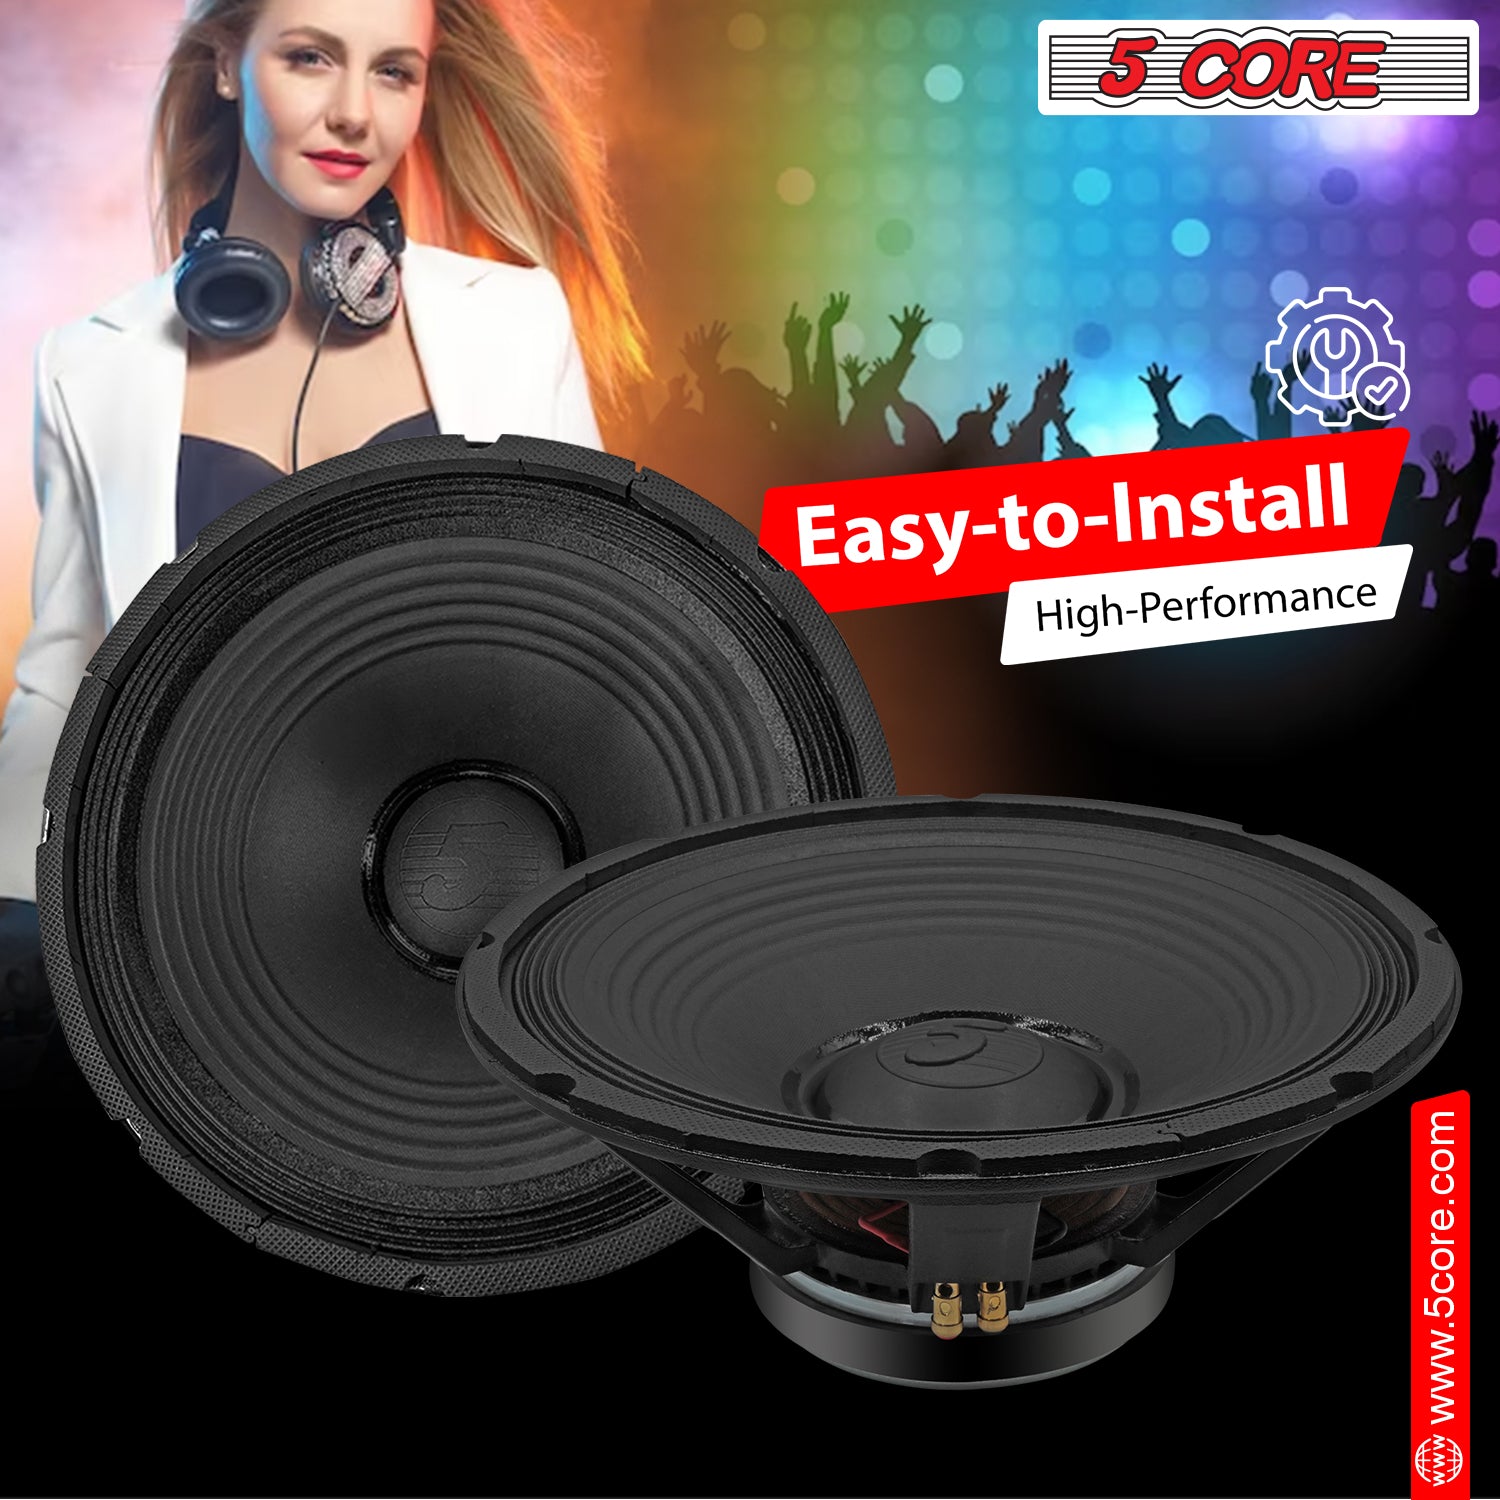 15 inch subwoofer easy to install